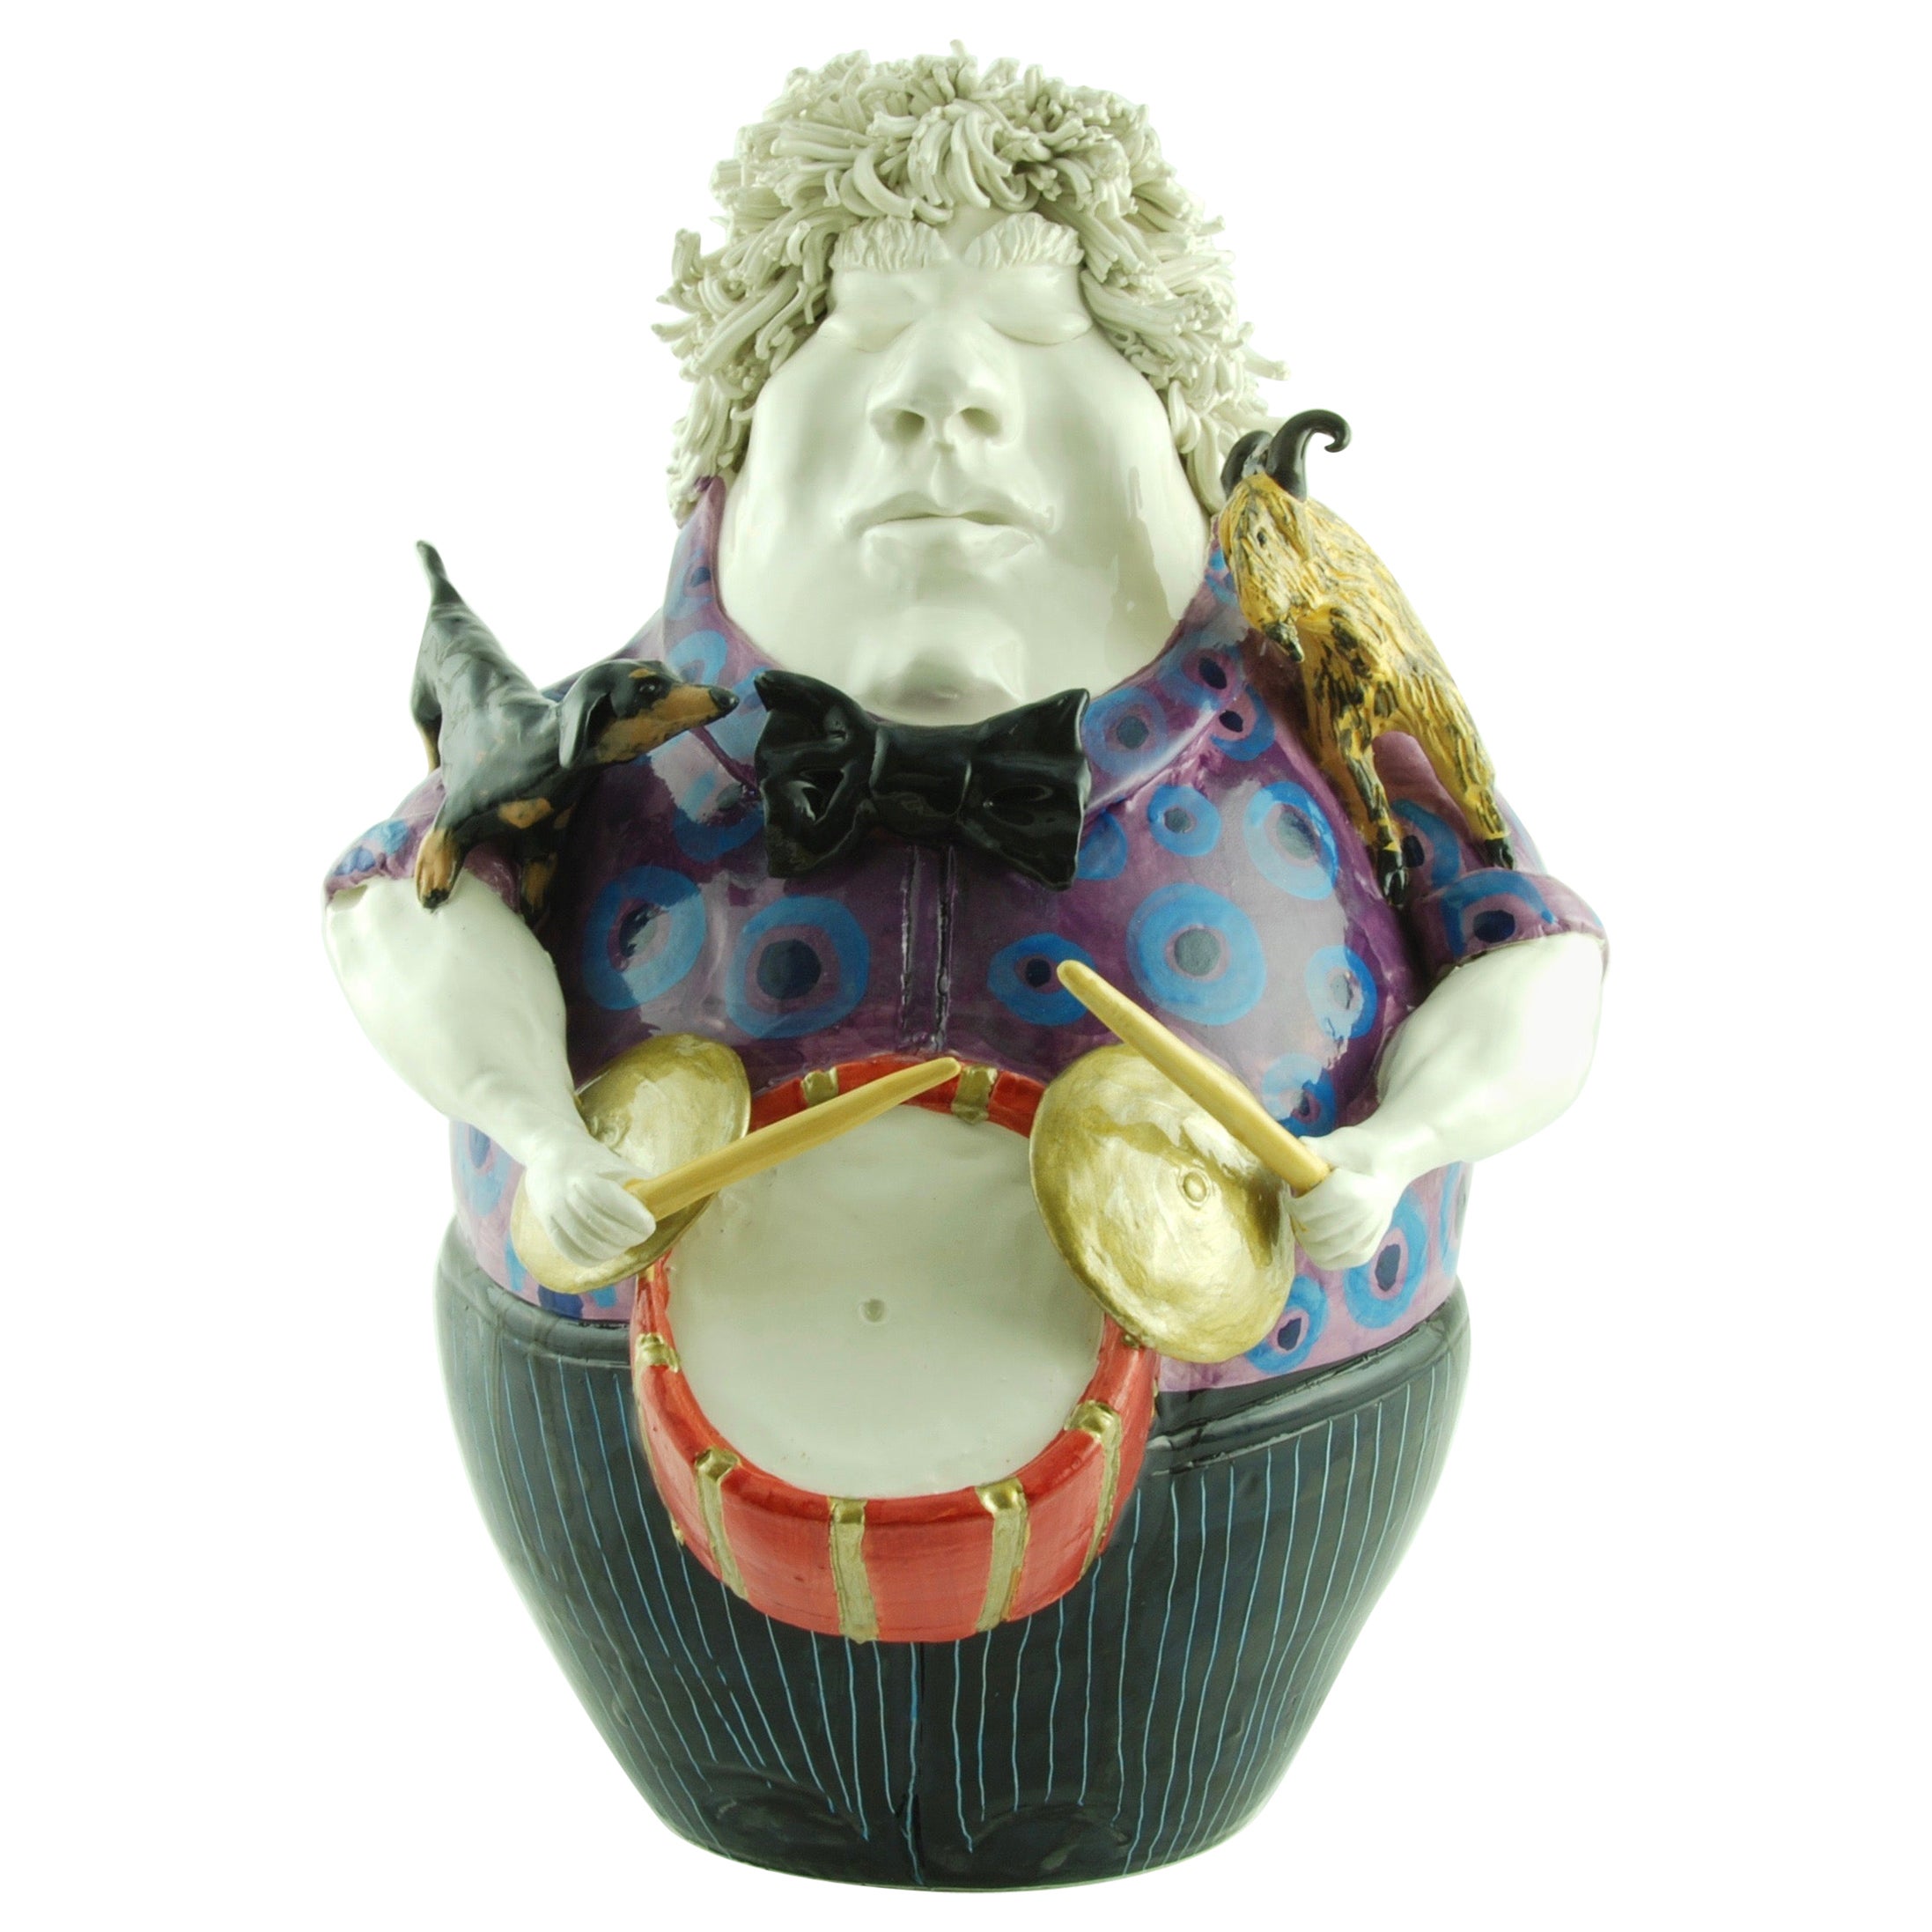 Musician Drums Decorative Ceramic Piece, Handmade Italy, 2021, Hand-Crafted